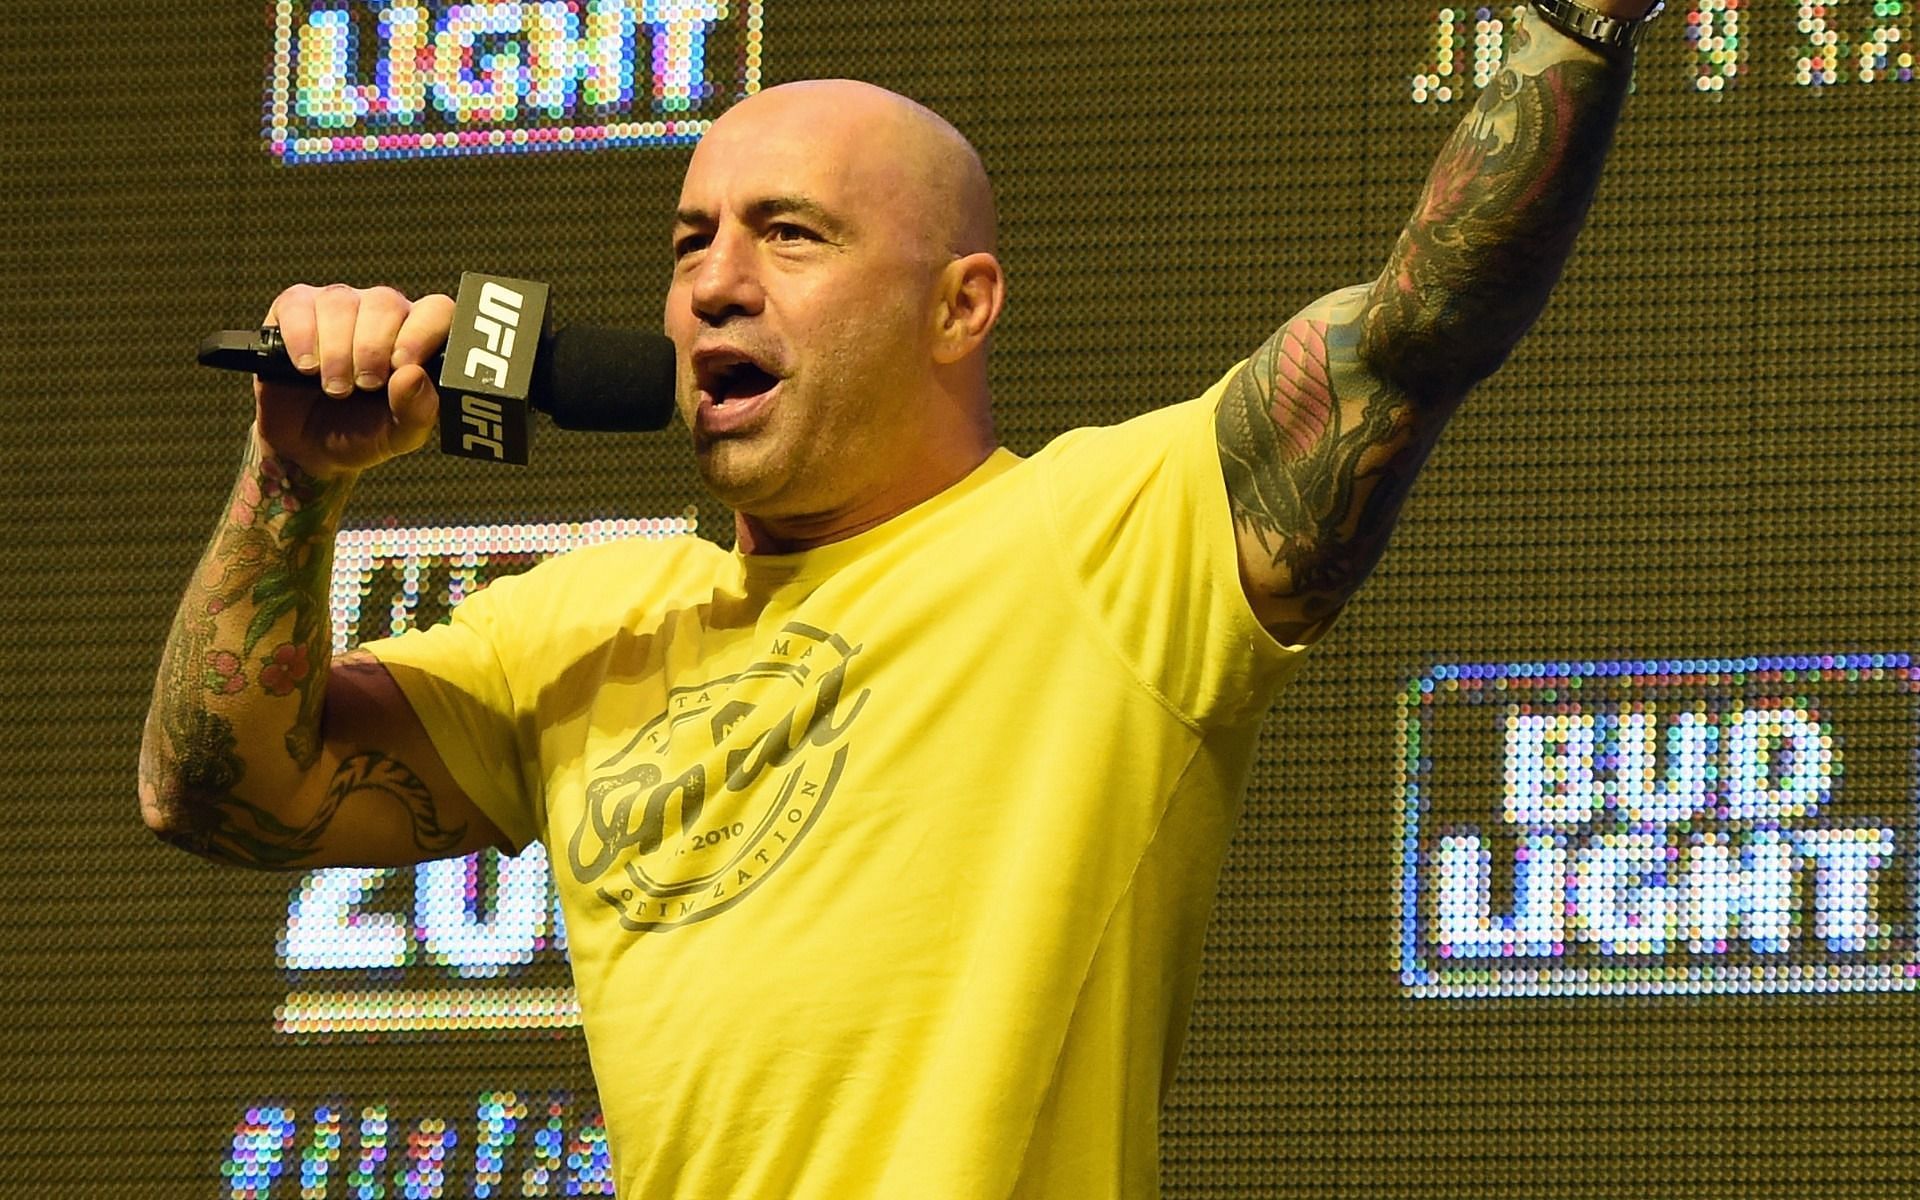 Rogan speaks during the UFC 200 weigh-ins at the T-Mobile Arena in Las Vegas, Nevada